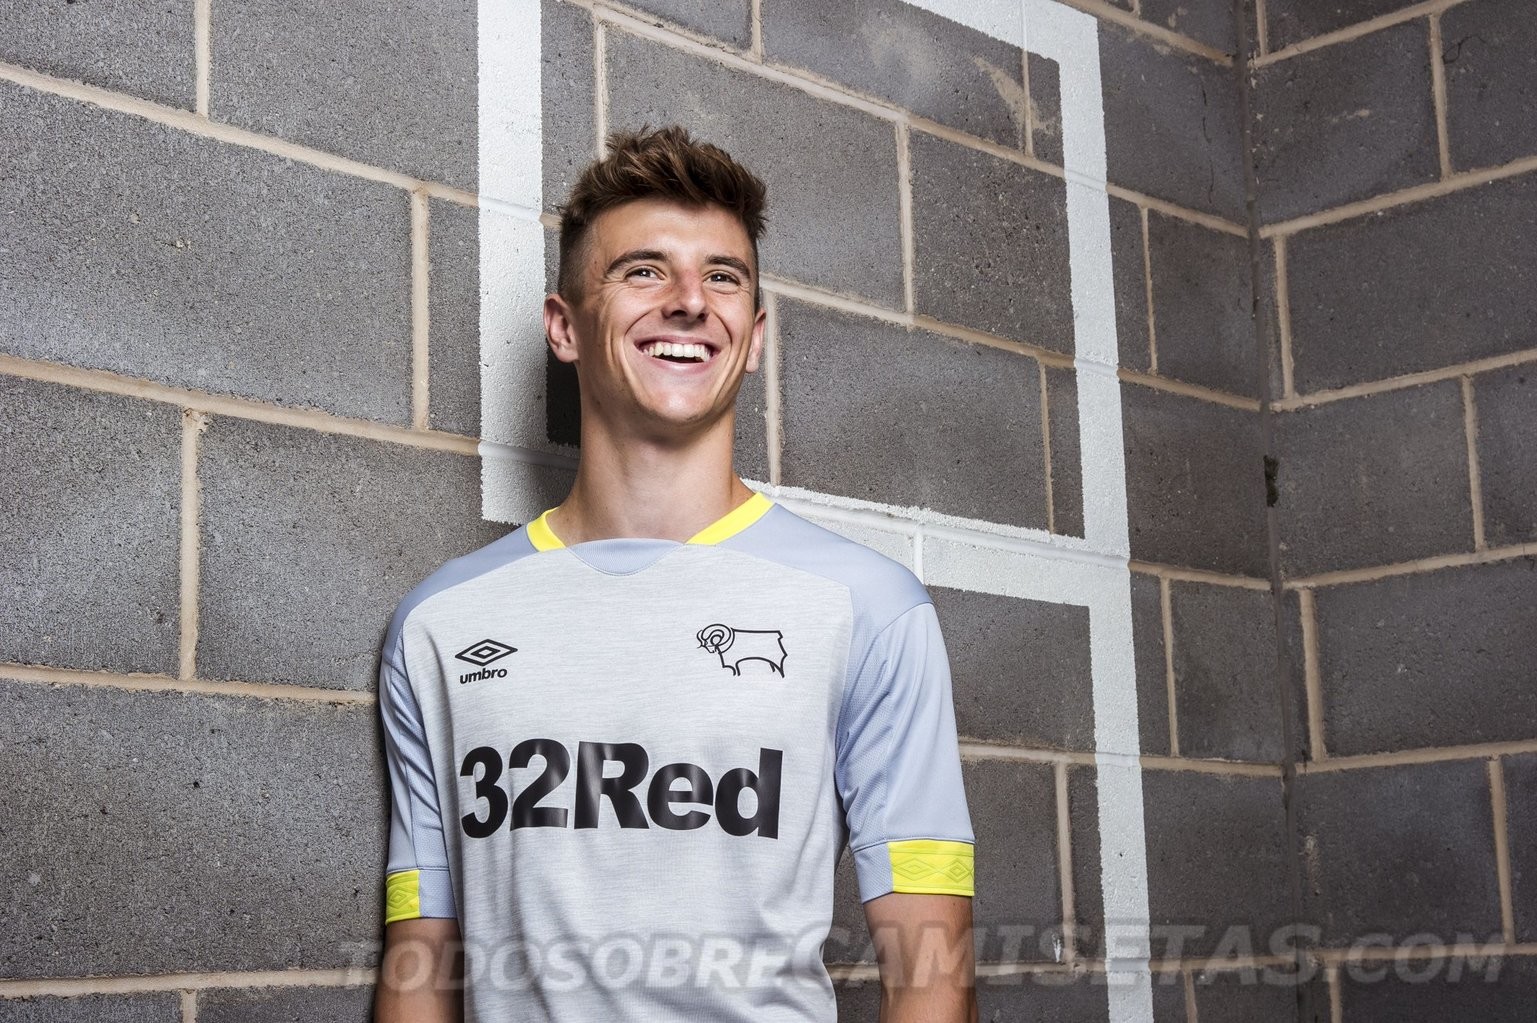 Derby County FC Umbro Third Kit 2018-19